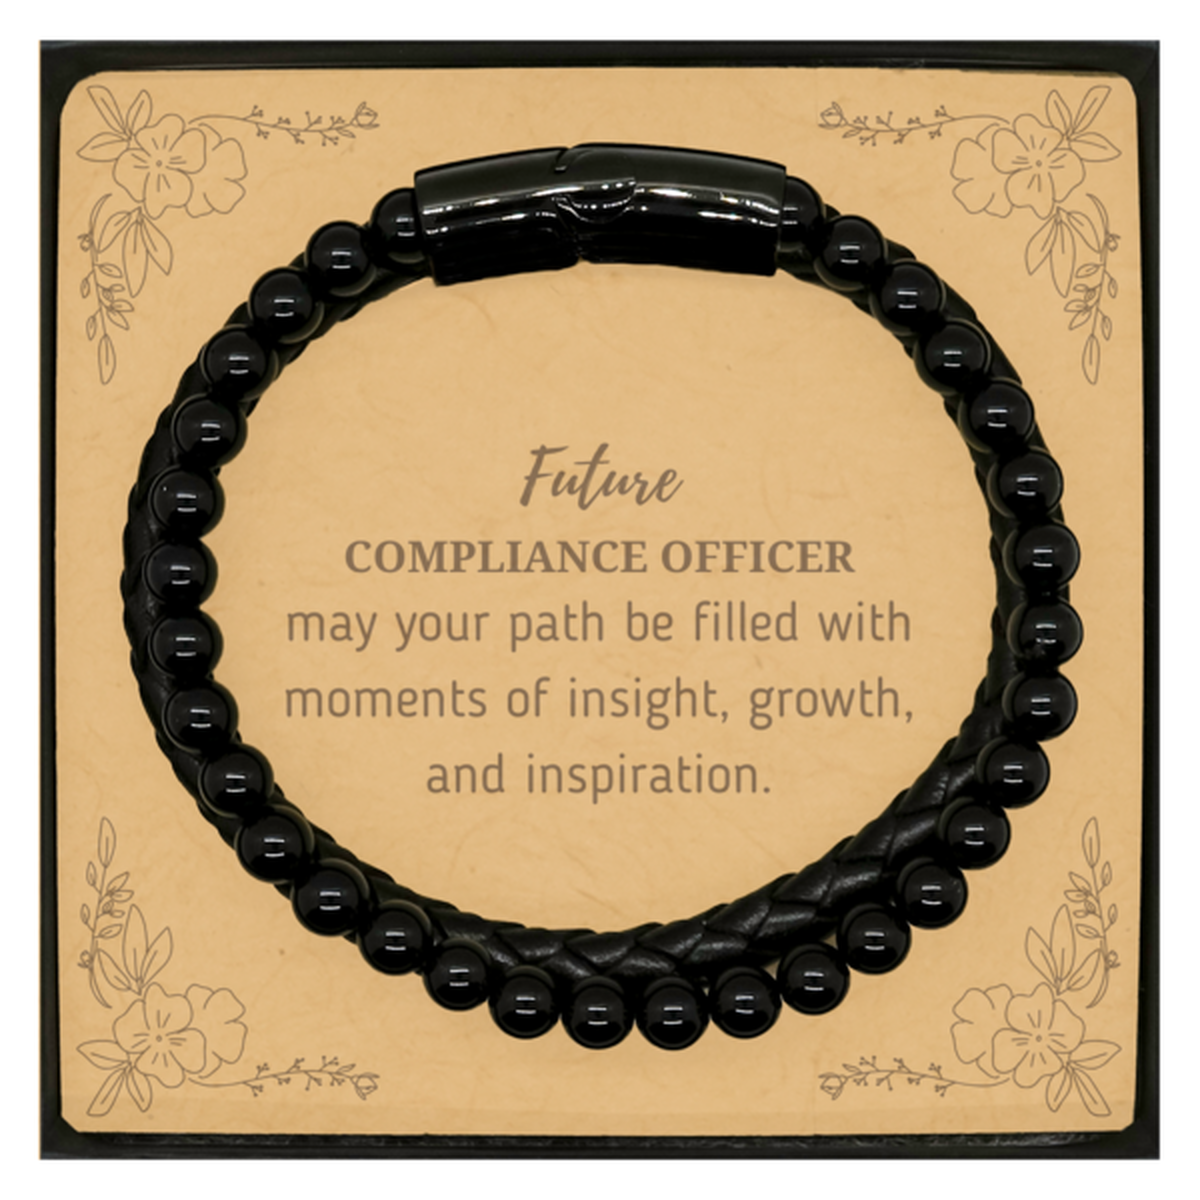 Future Compliance Officer Gifts, May your path be filled with moments of insight, Graduation Gifts for New Compliance Officer, Christmas Unique Stone Leather Bracelets For Men, Women, Friends